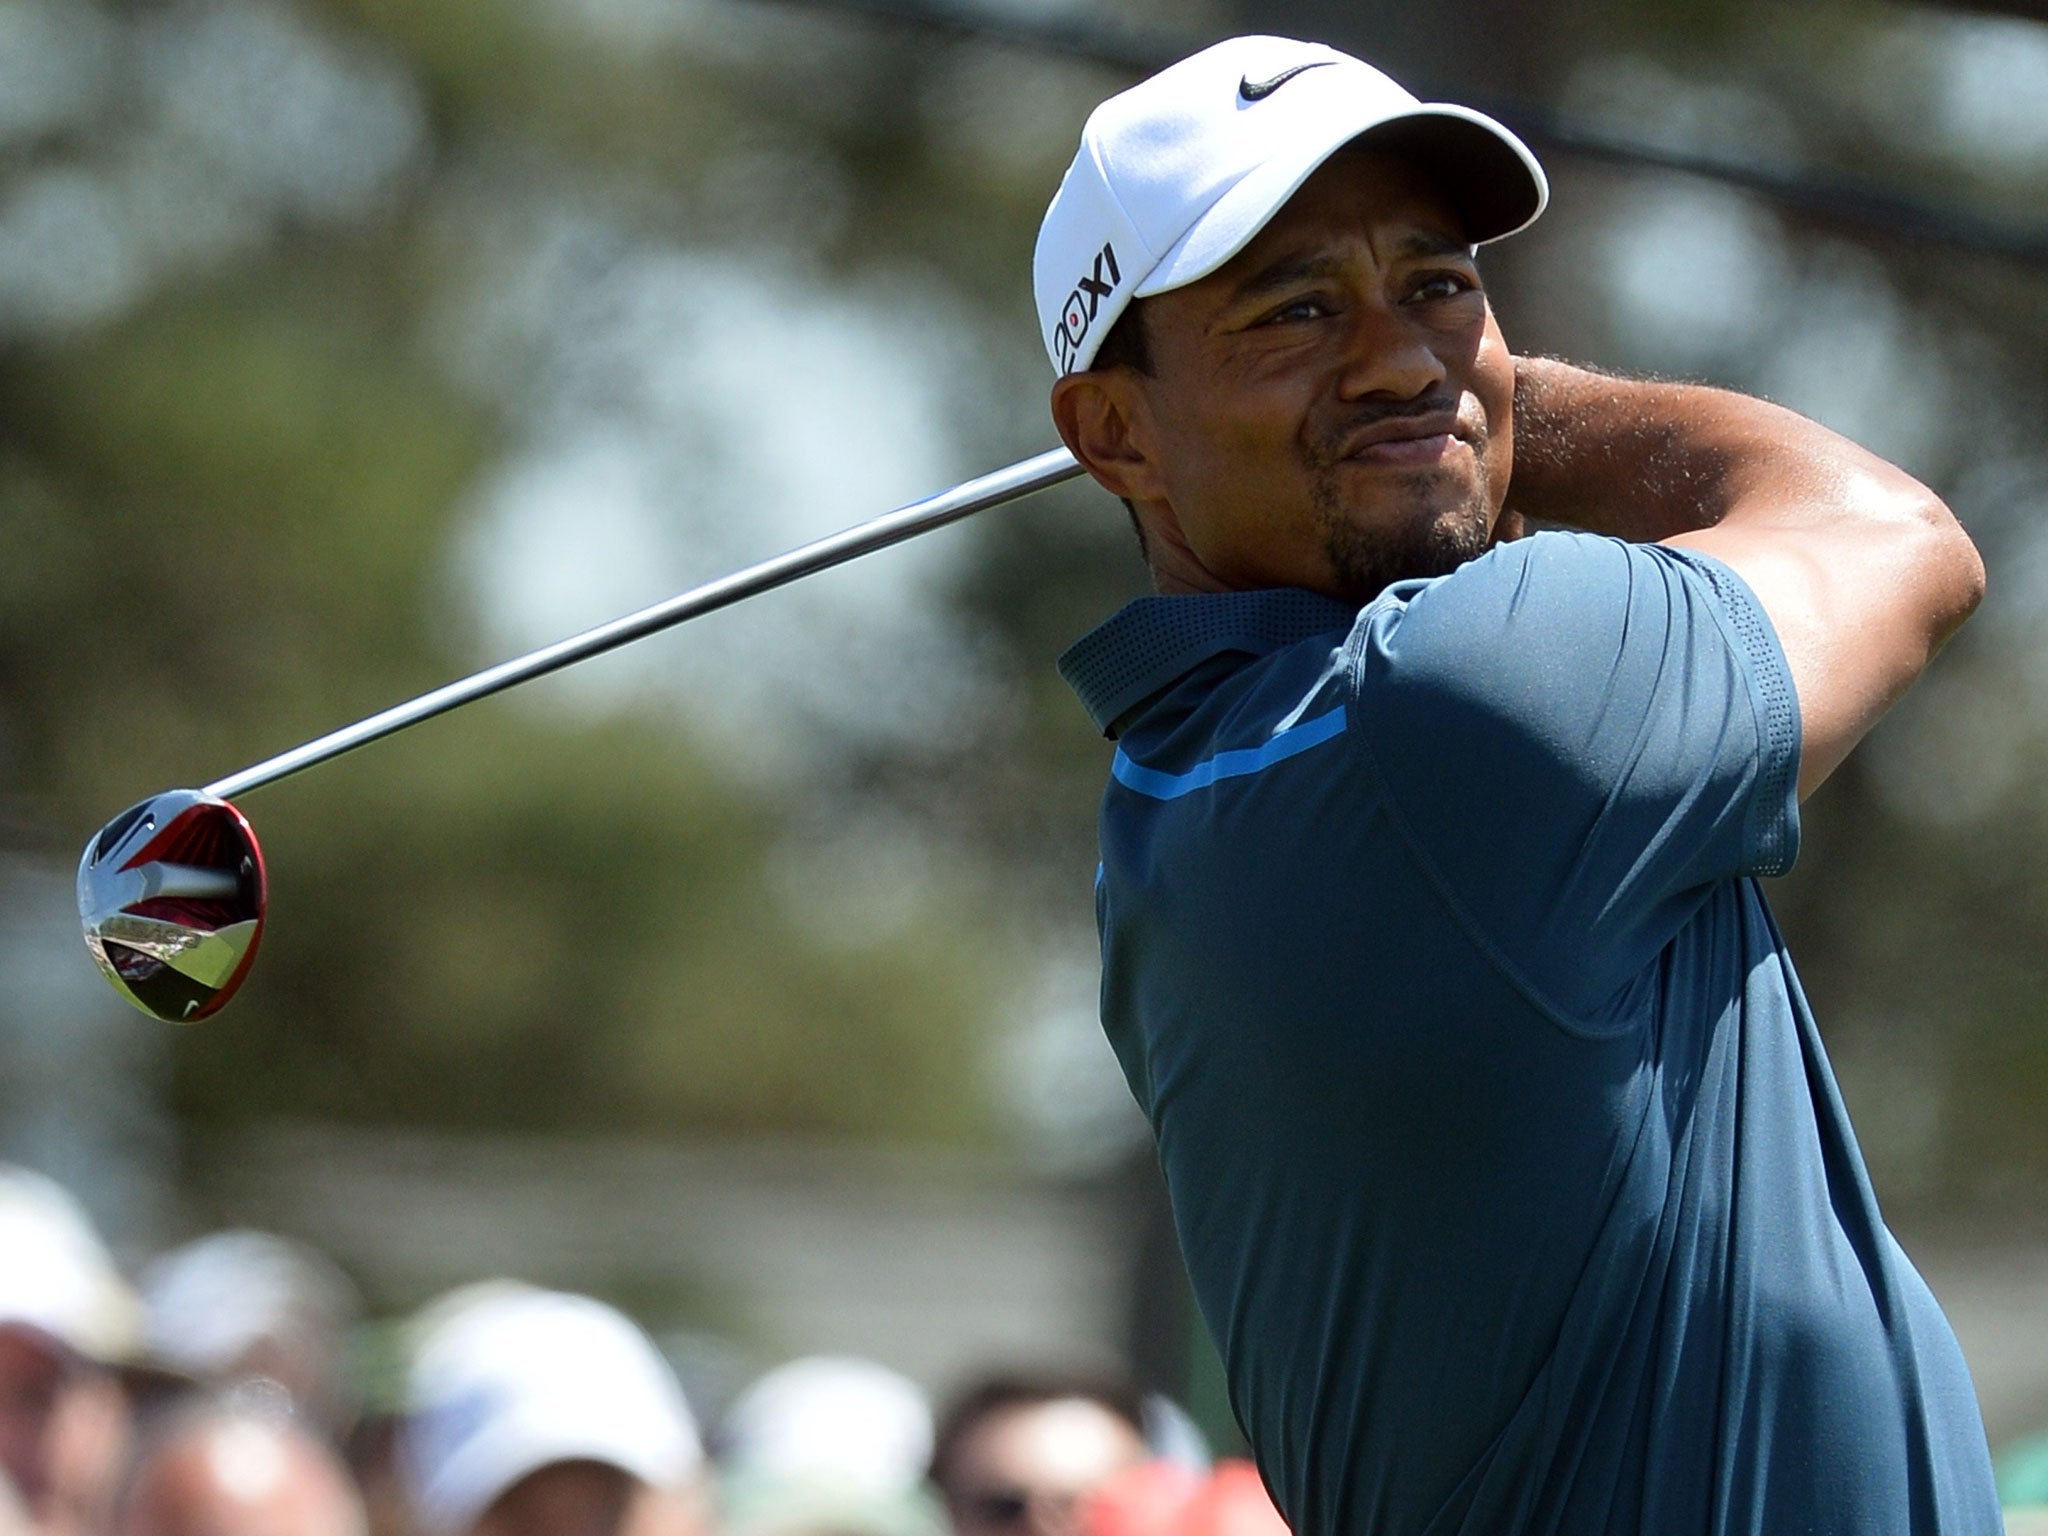 Tiger Woods teed off mired in a rules controversy after taking an incorrect drop on Friday